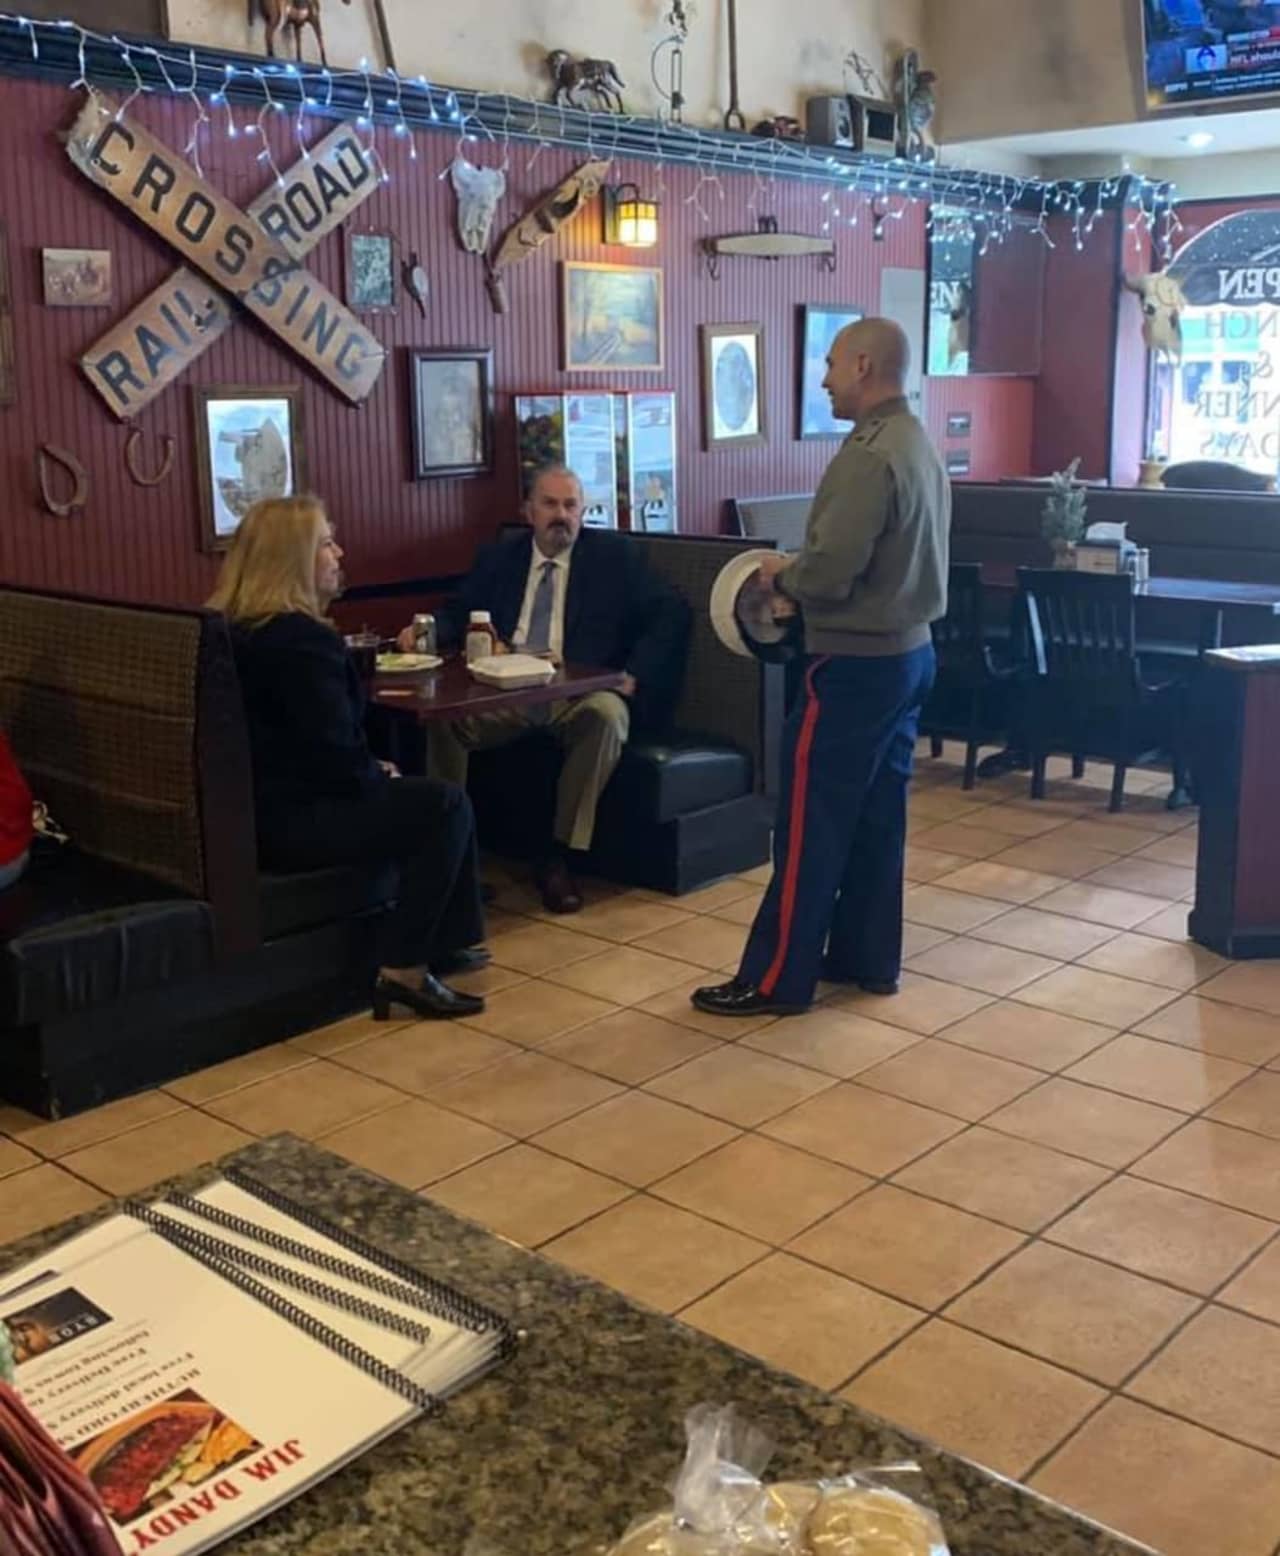 A U.S. Marine who recently relocated to the area had his lunch paid for by Rutherford councilwoman Stephanie McGowan, pictured here talking to him with her colleague from Felician University.